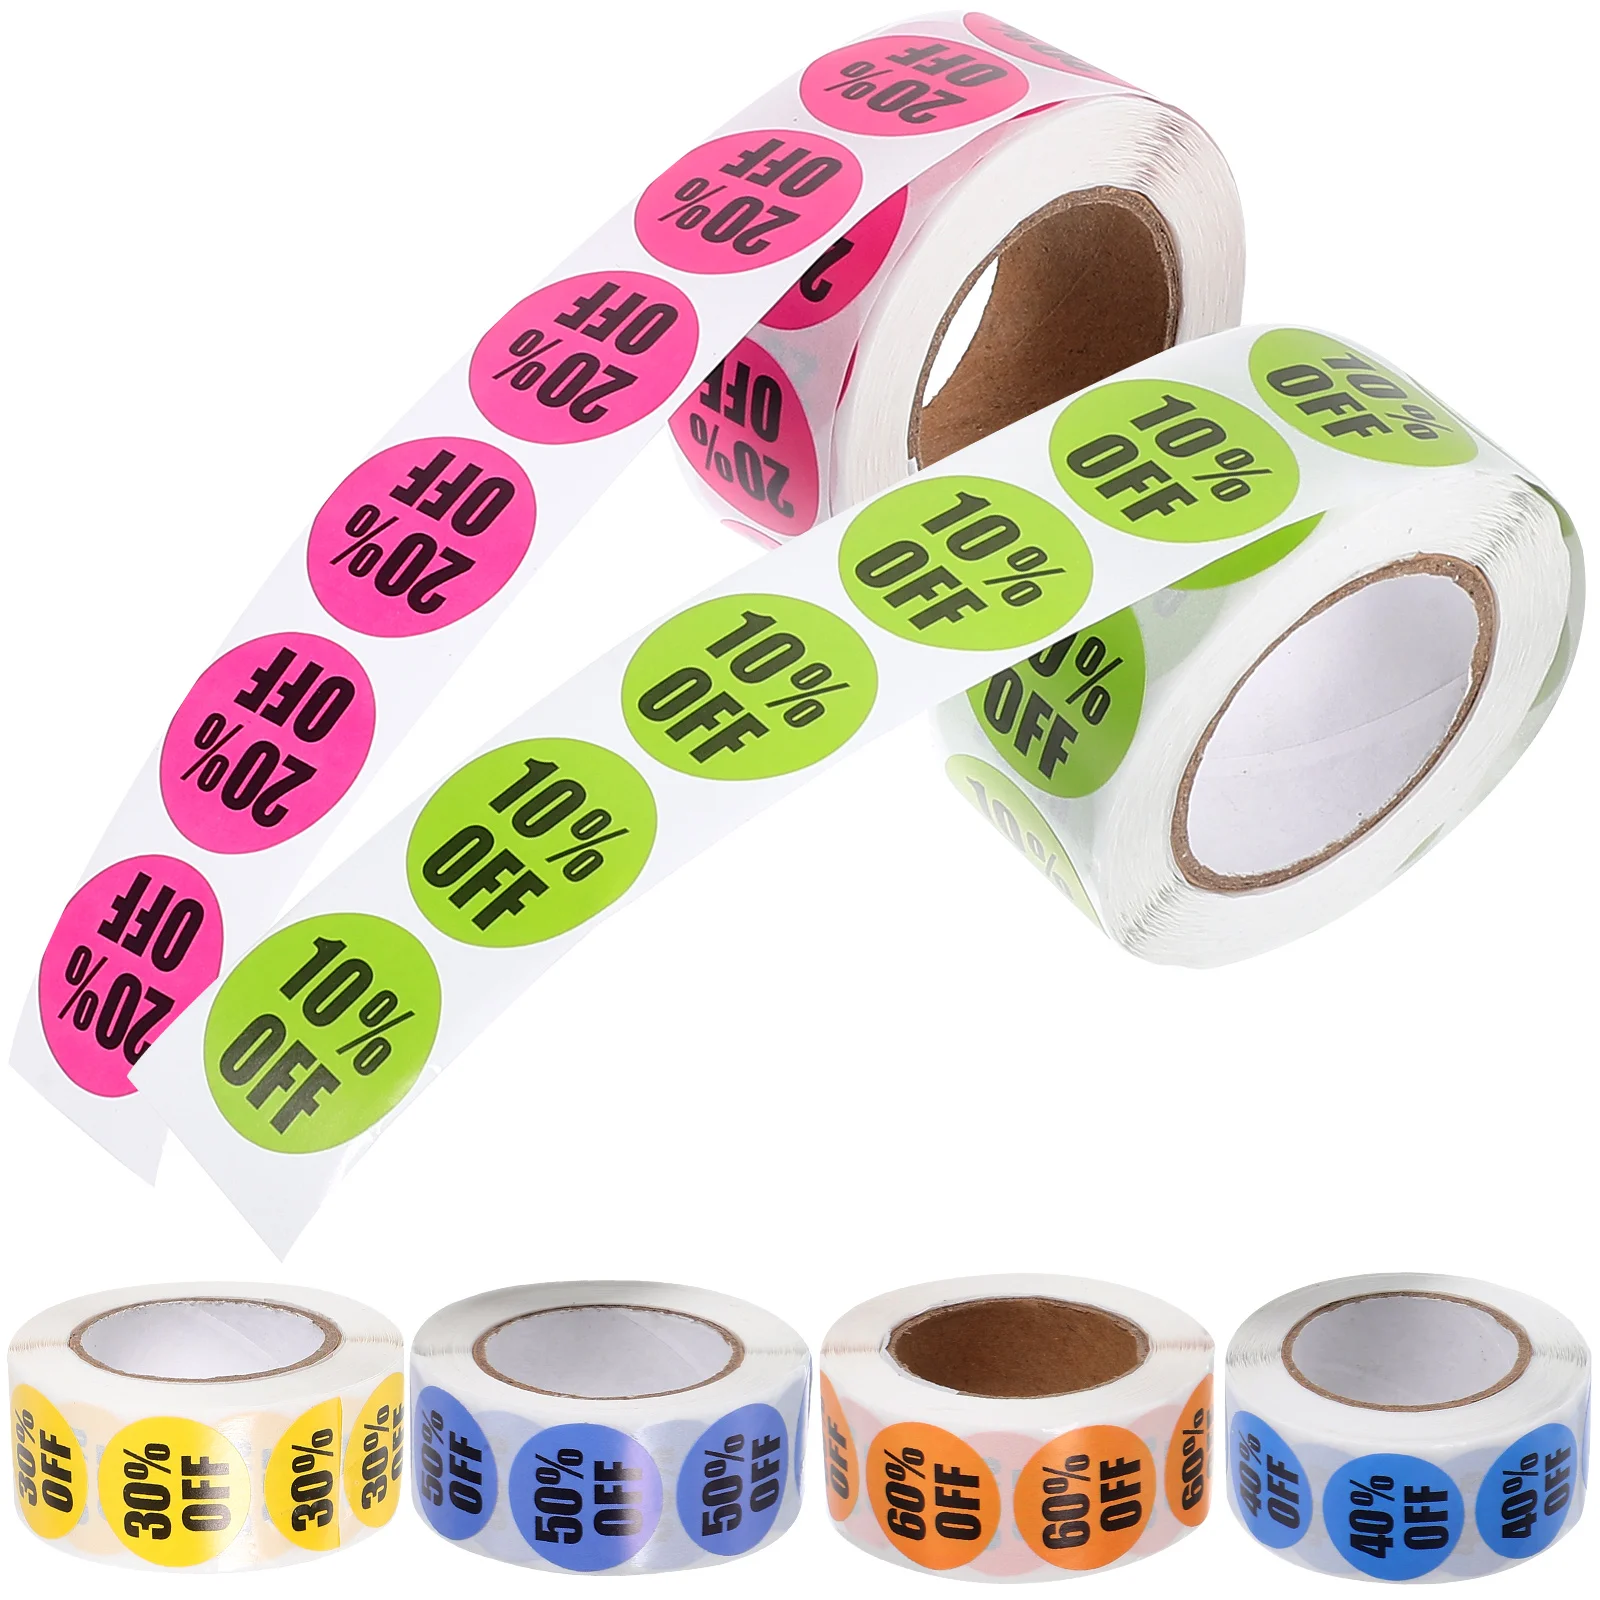 

6 Rolls of Circle Percent Off Decals Small Discount Stickers Colored Round Stickers Retail Store Labels